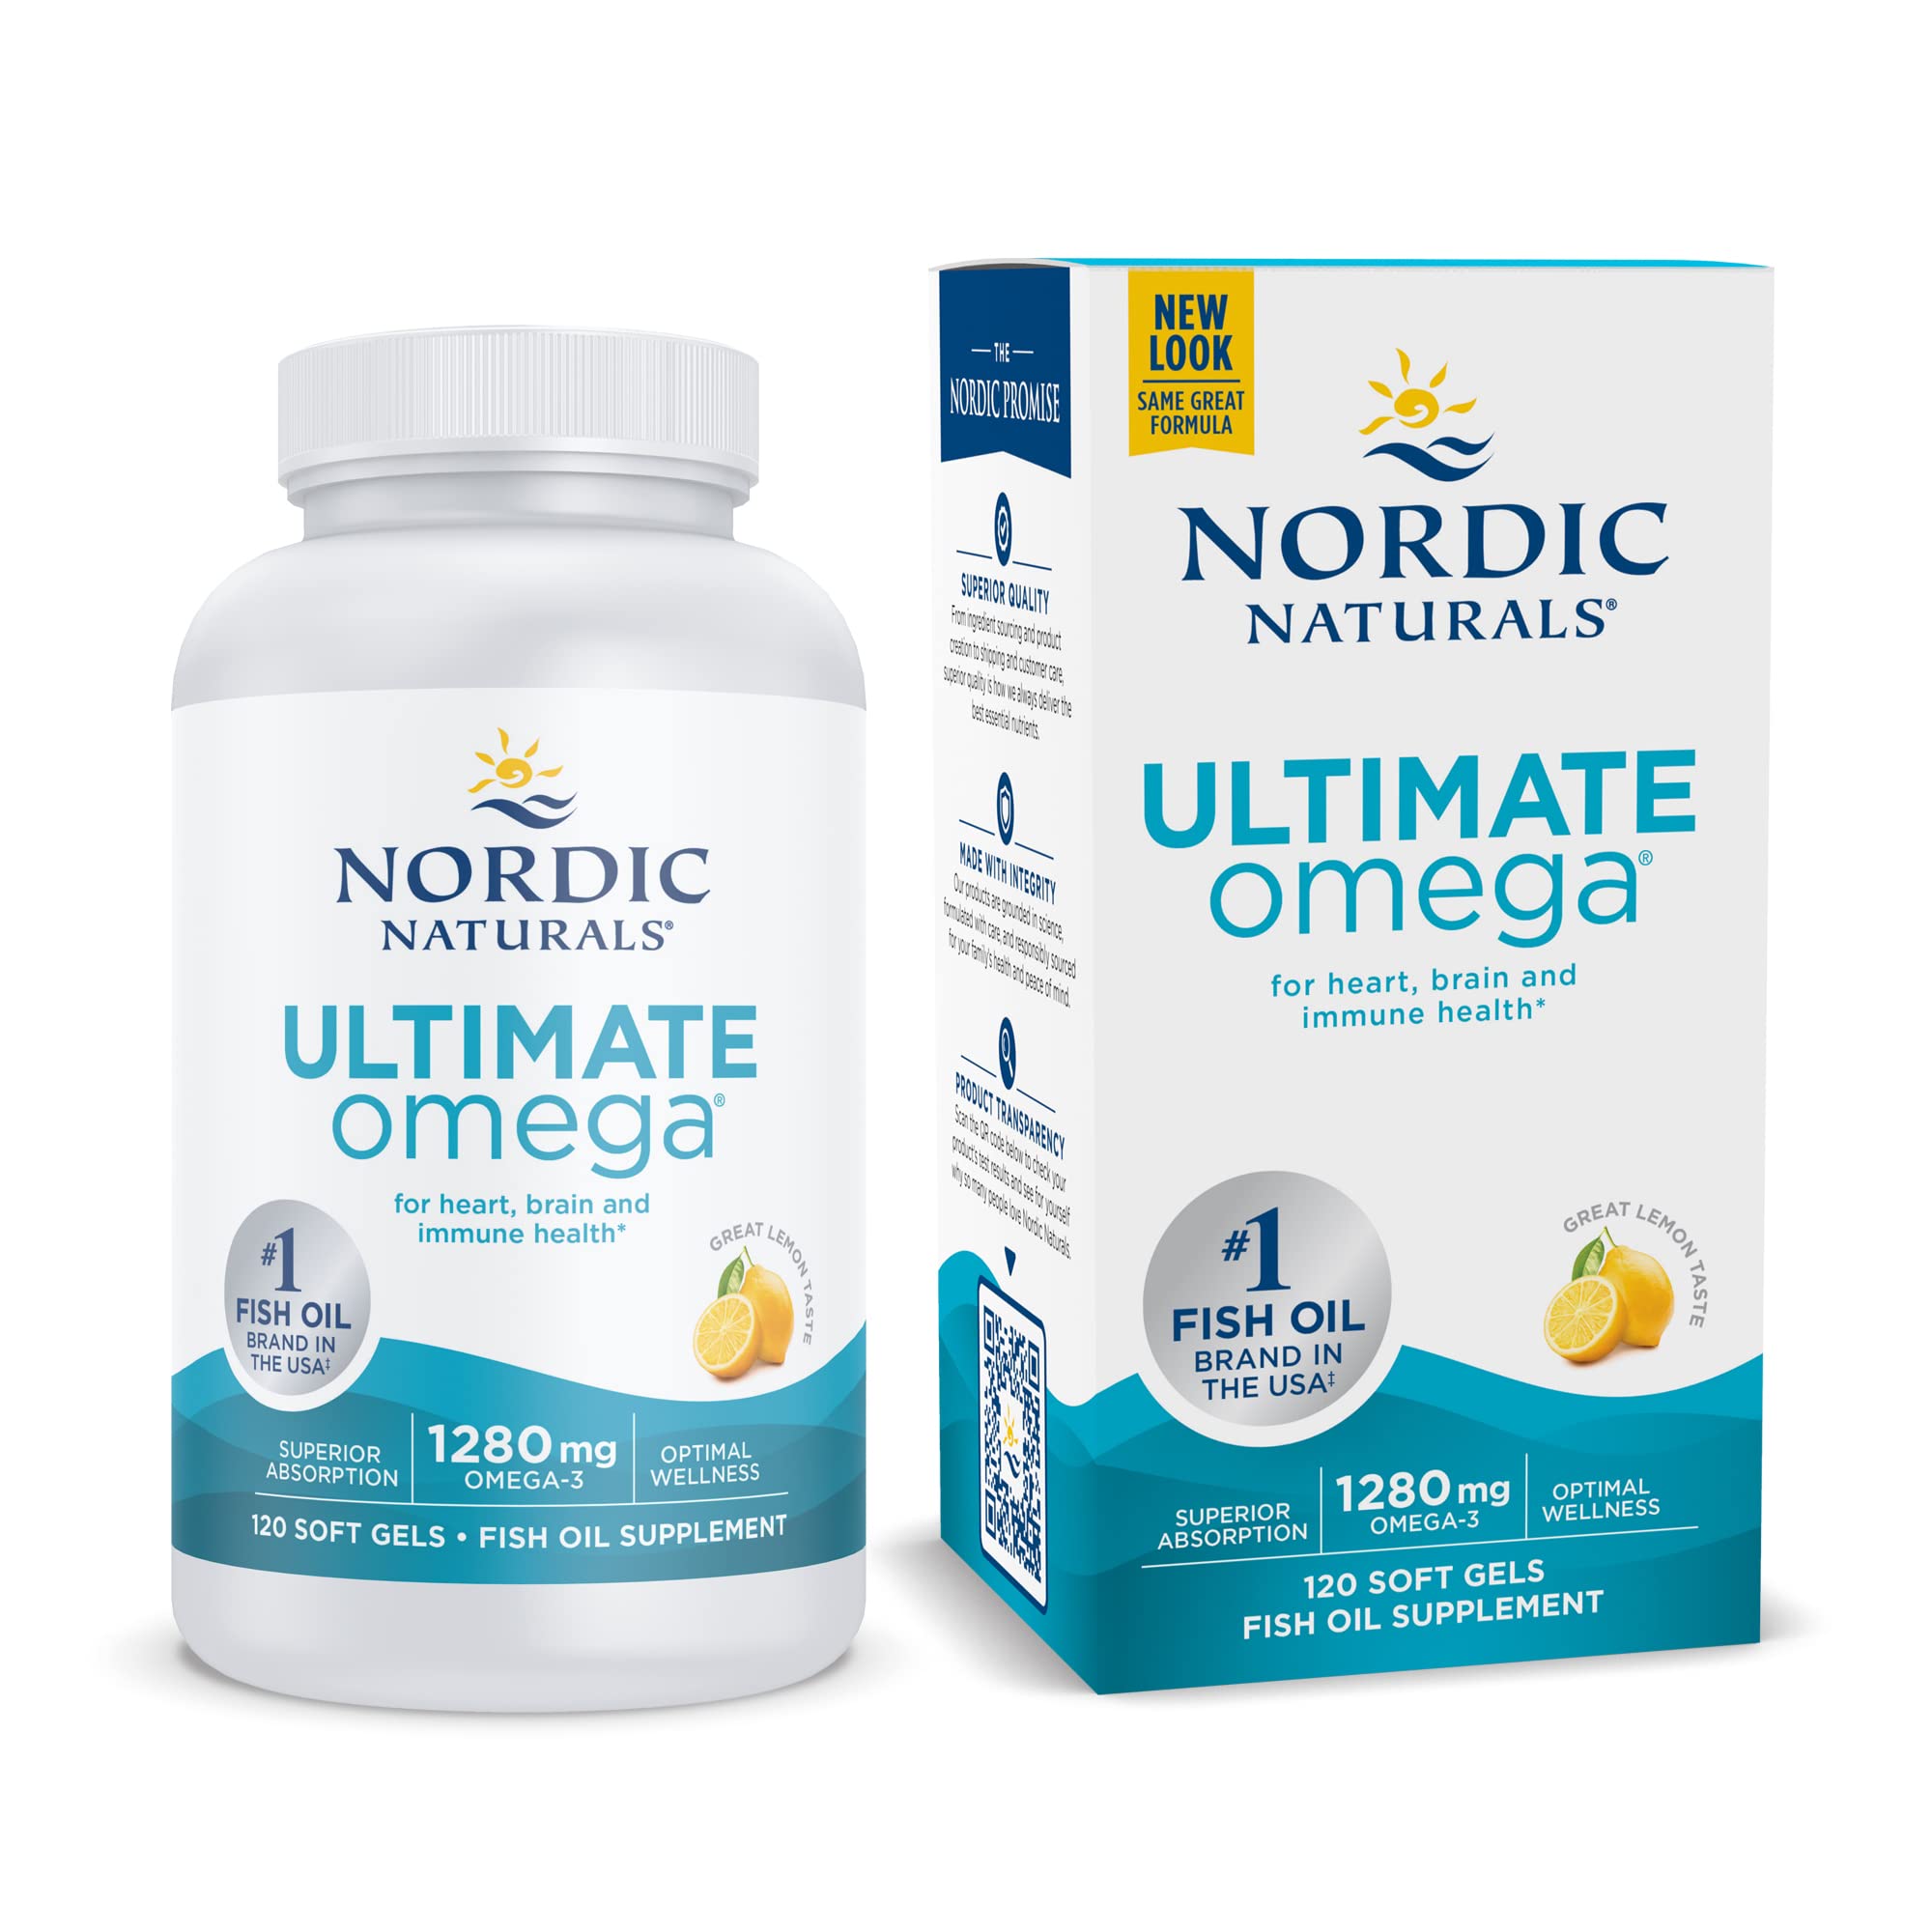 Nordic Naturals Ultimate Omega, Lemon Flavor - 1280 mg Omega-3-120 Soft Gels - High-Potency Omega-3 Fish Oil Supplement with EPA & DHA - Promotes Brain & Heart Health - Non-GMO - 60 Servings